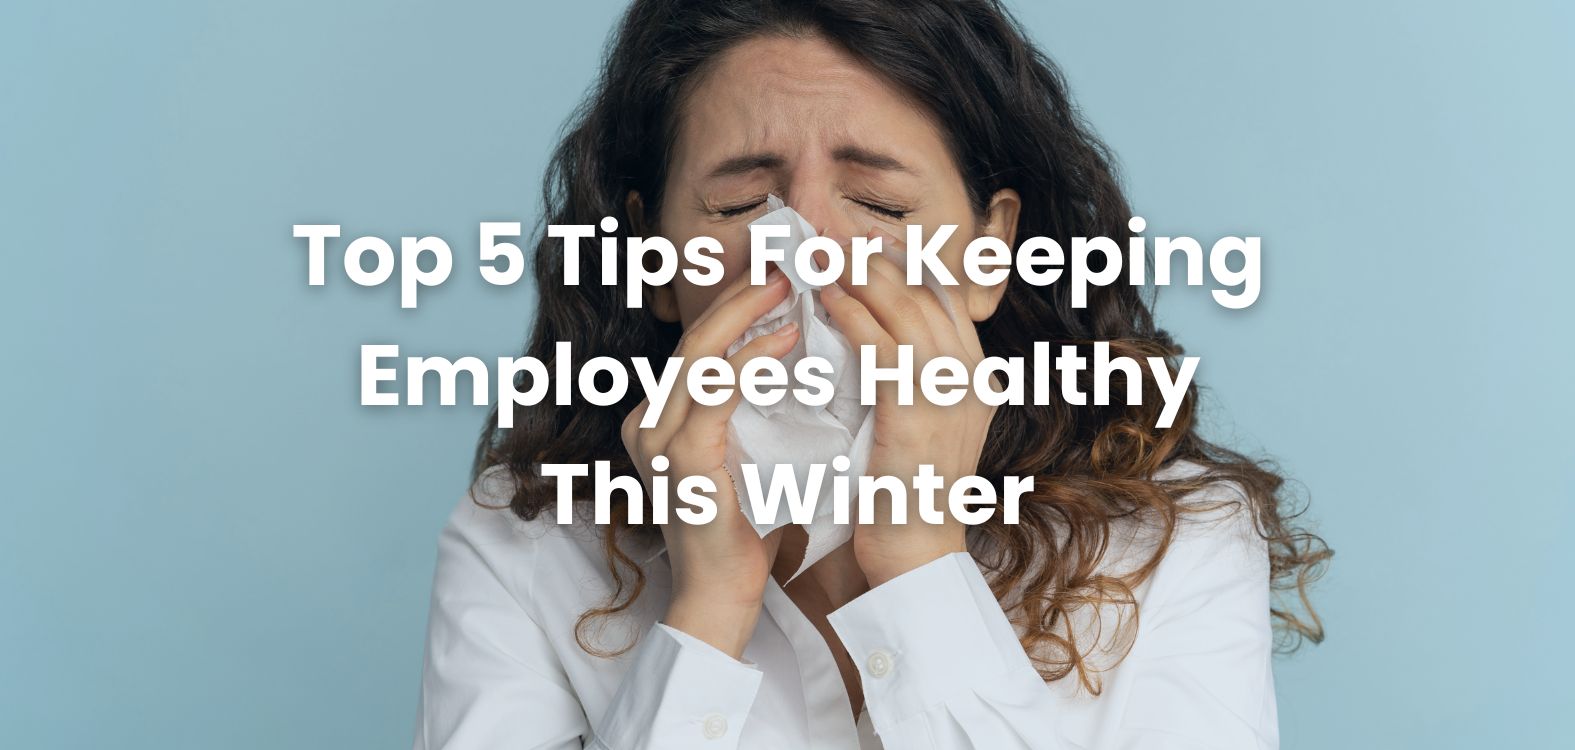 Top 5 Tips for keeping employees healthy this winter